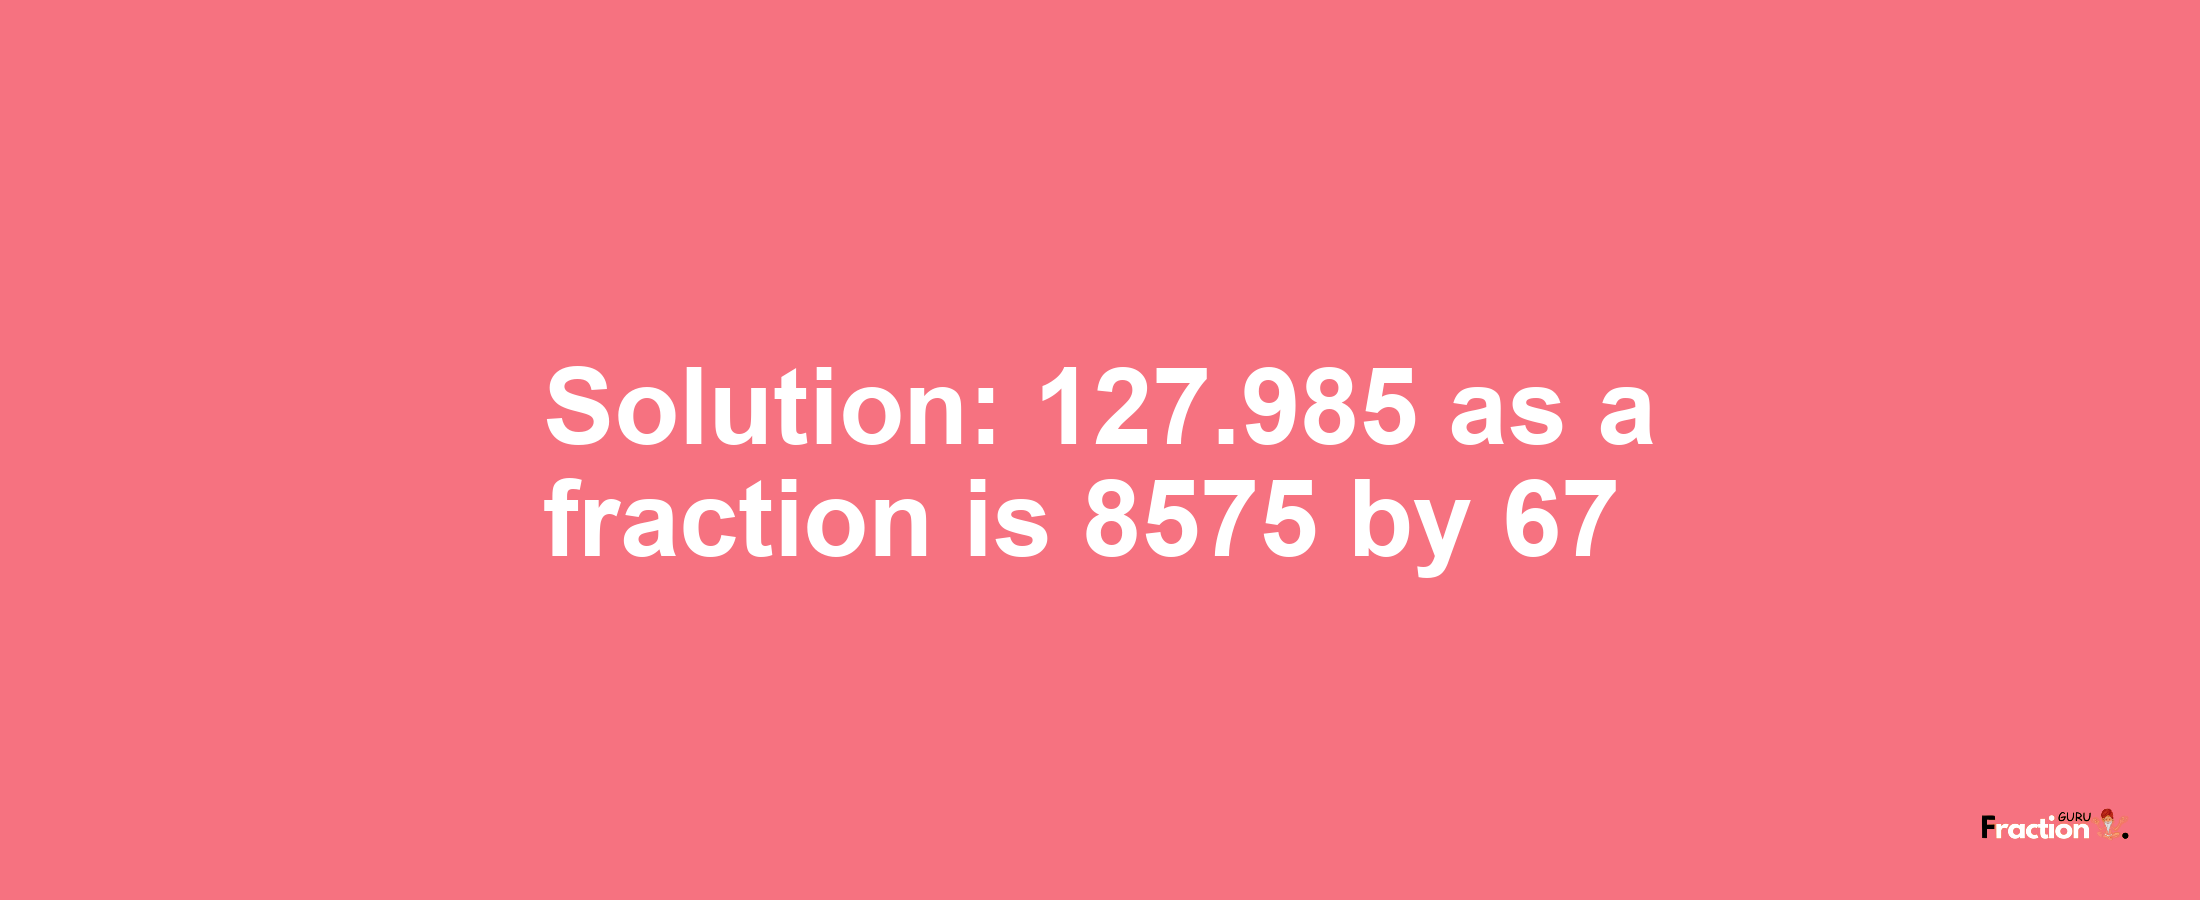 Solution:127.985 as a fraction is 8575/67